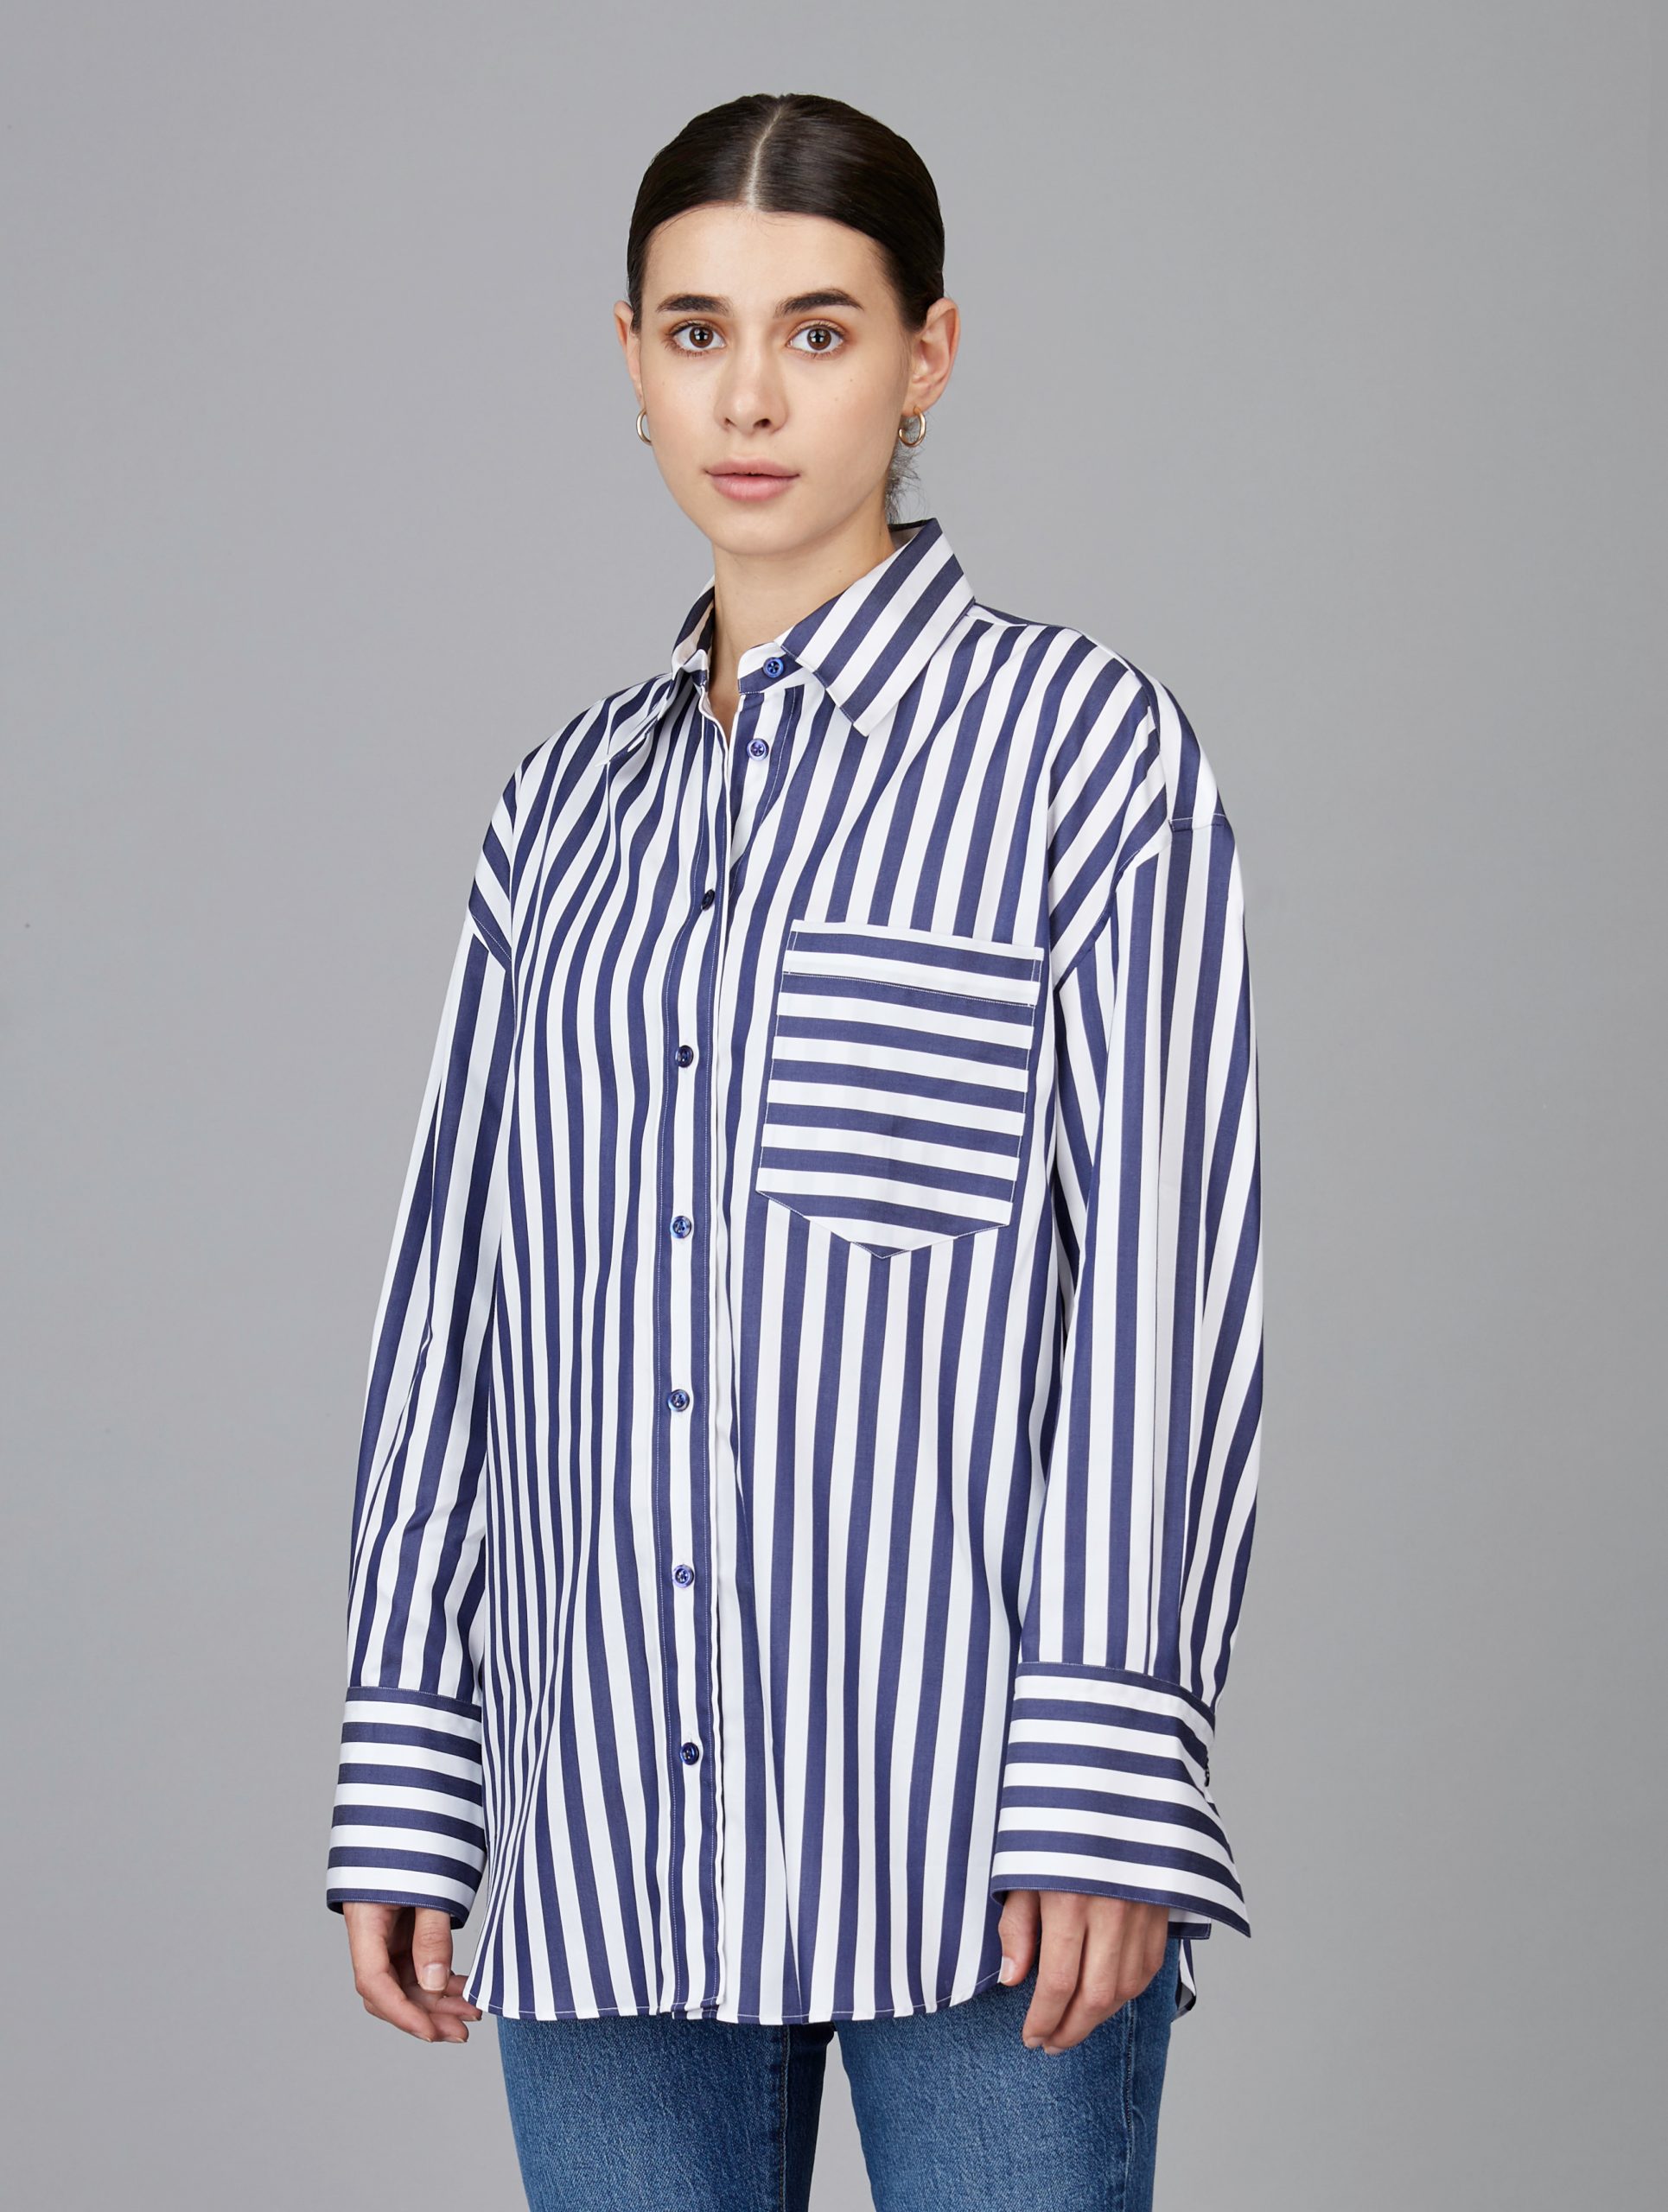 Awning stripe boyfriend shirt in Navy blue colour - Camessi Collection